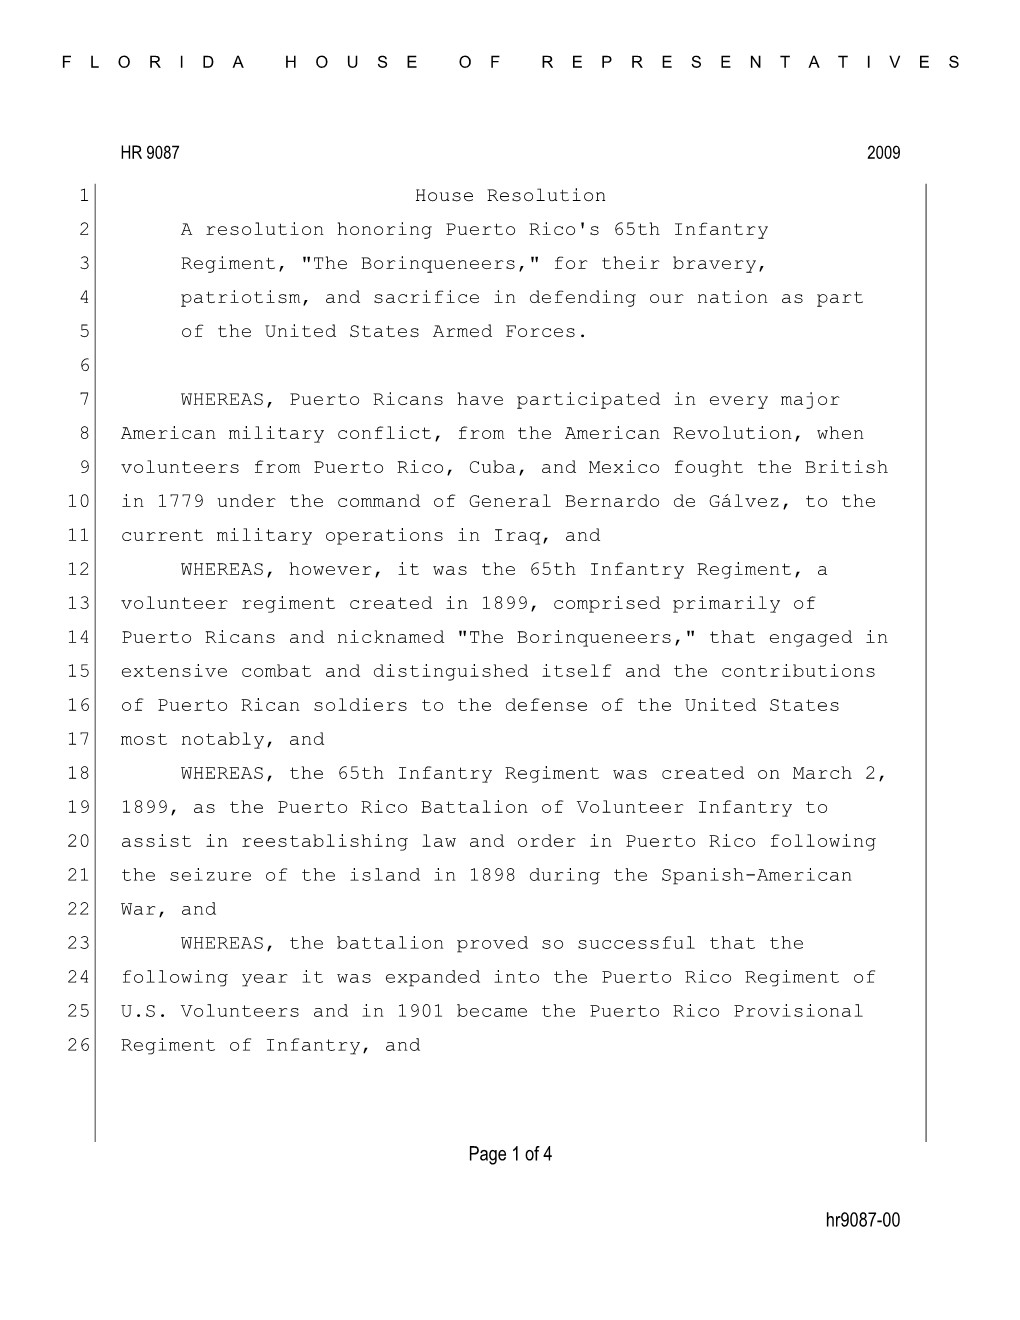 Hr9087-00 Page 1 of 4 House Resolution 1 a Resolution Honoring Puerto Rico's 65Th Infantry 2 Regiment